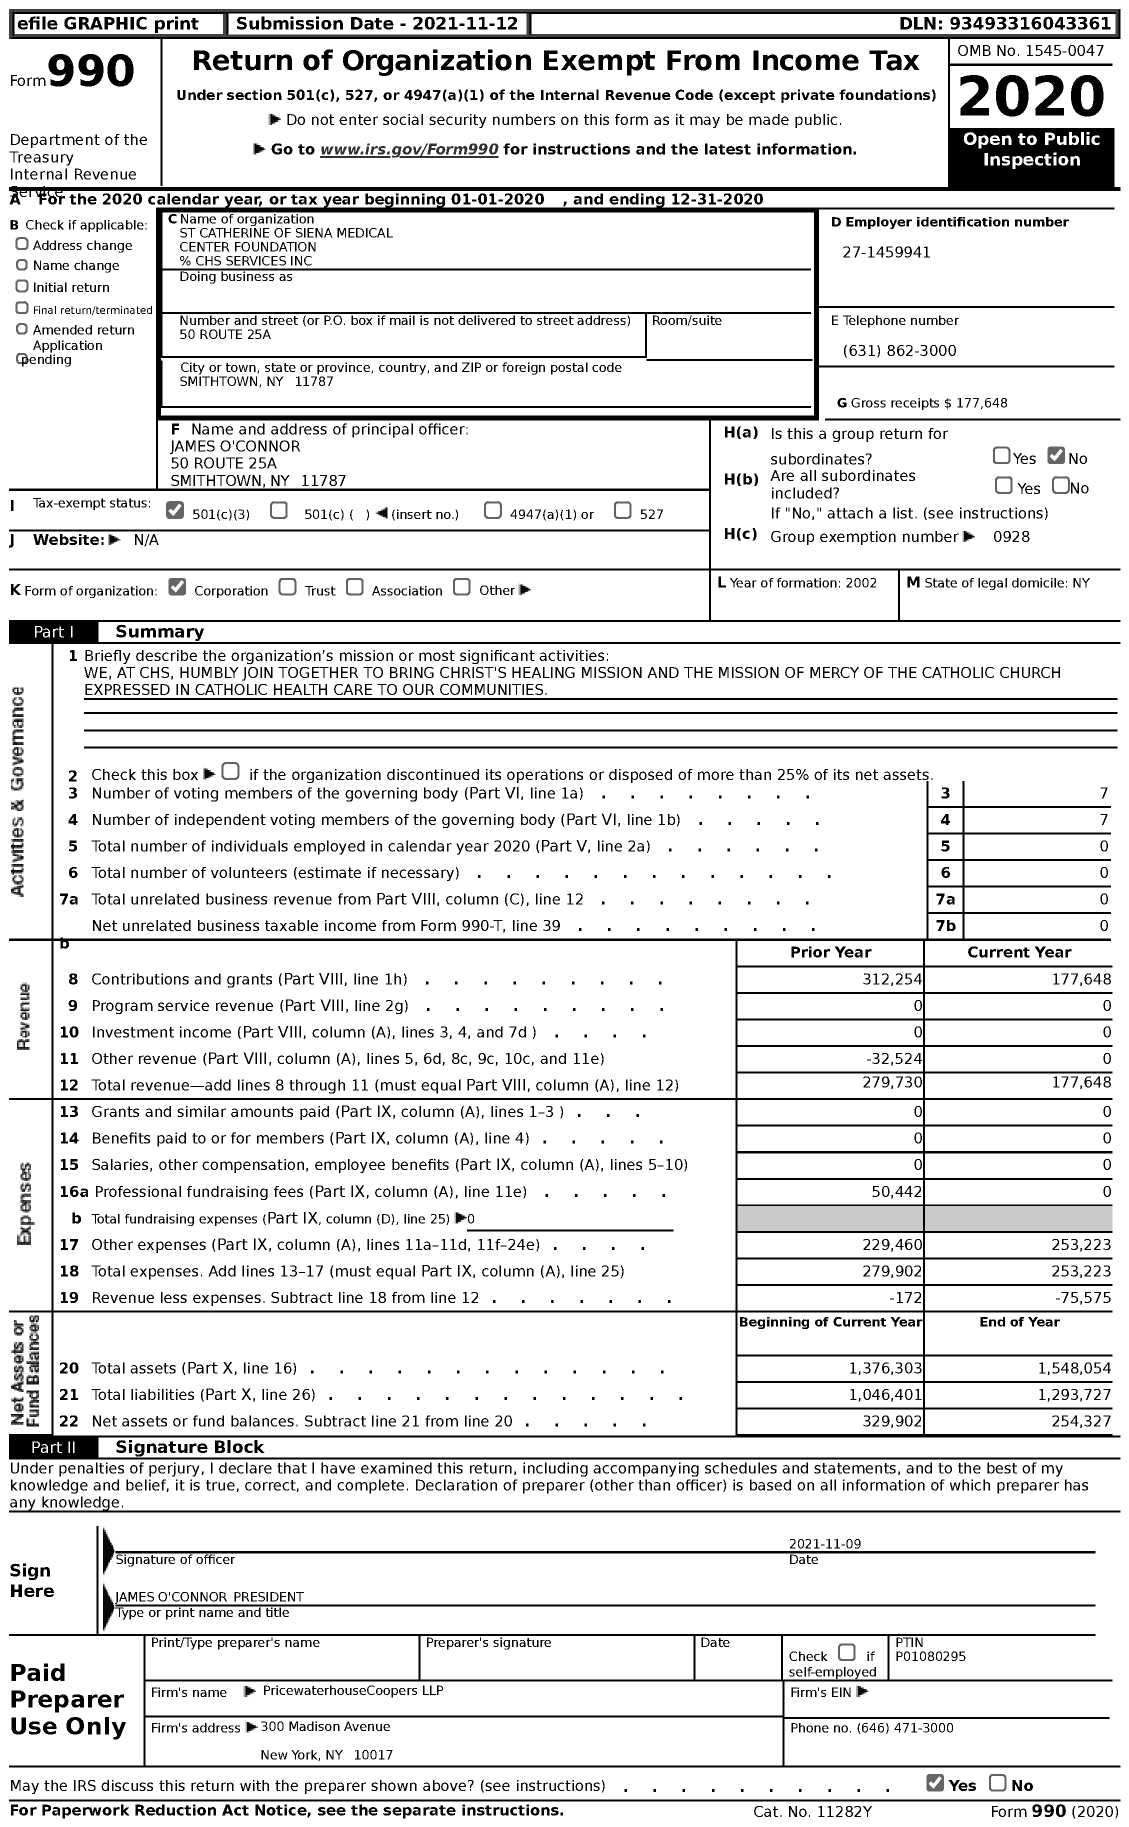 Image of first page of 2020 Form 990 for St Catherine of Siena Medical Center Foundation